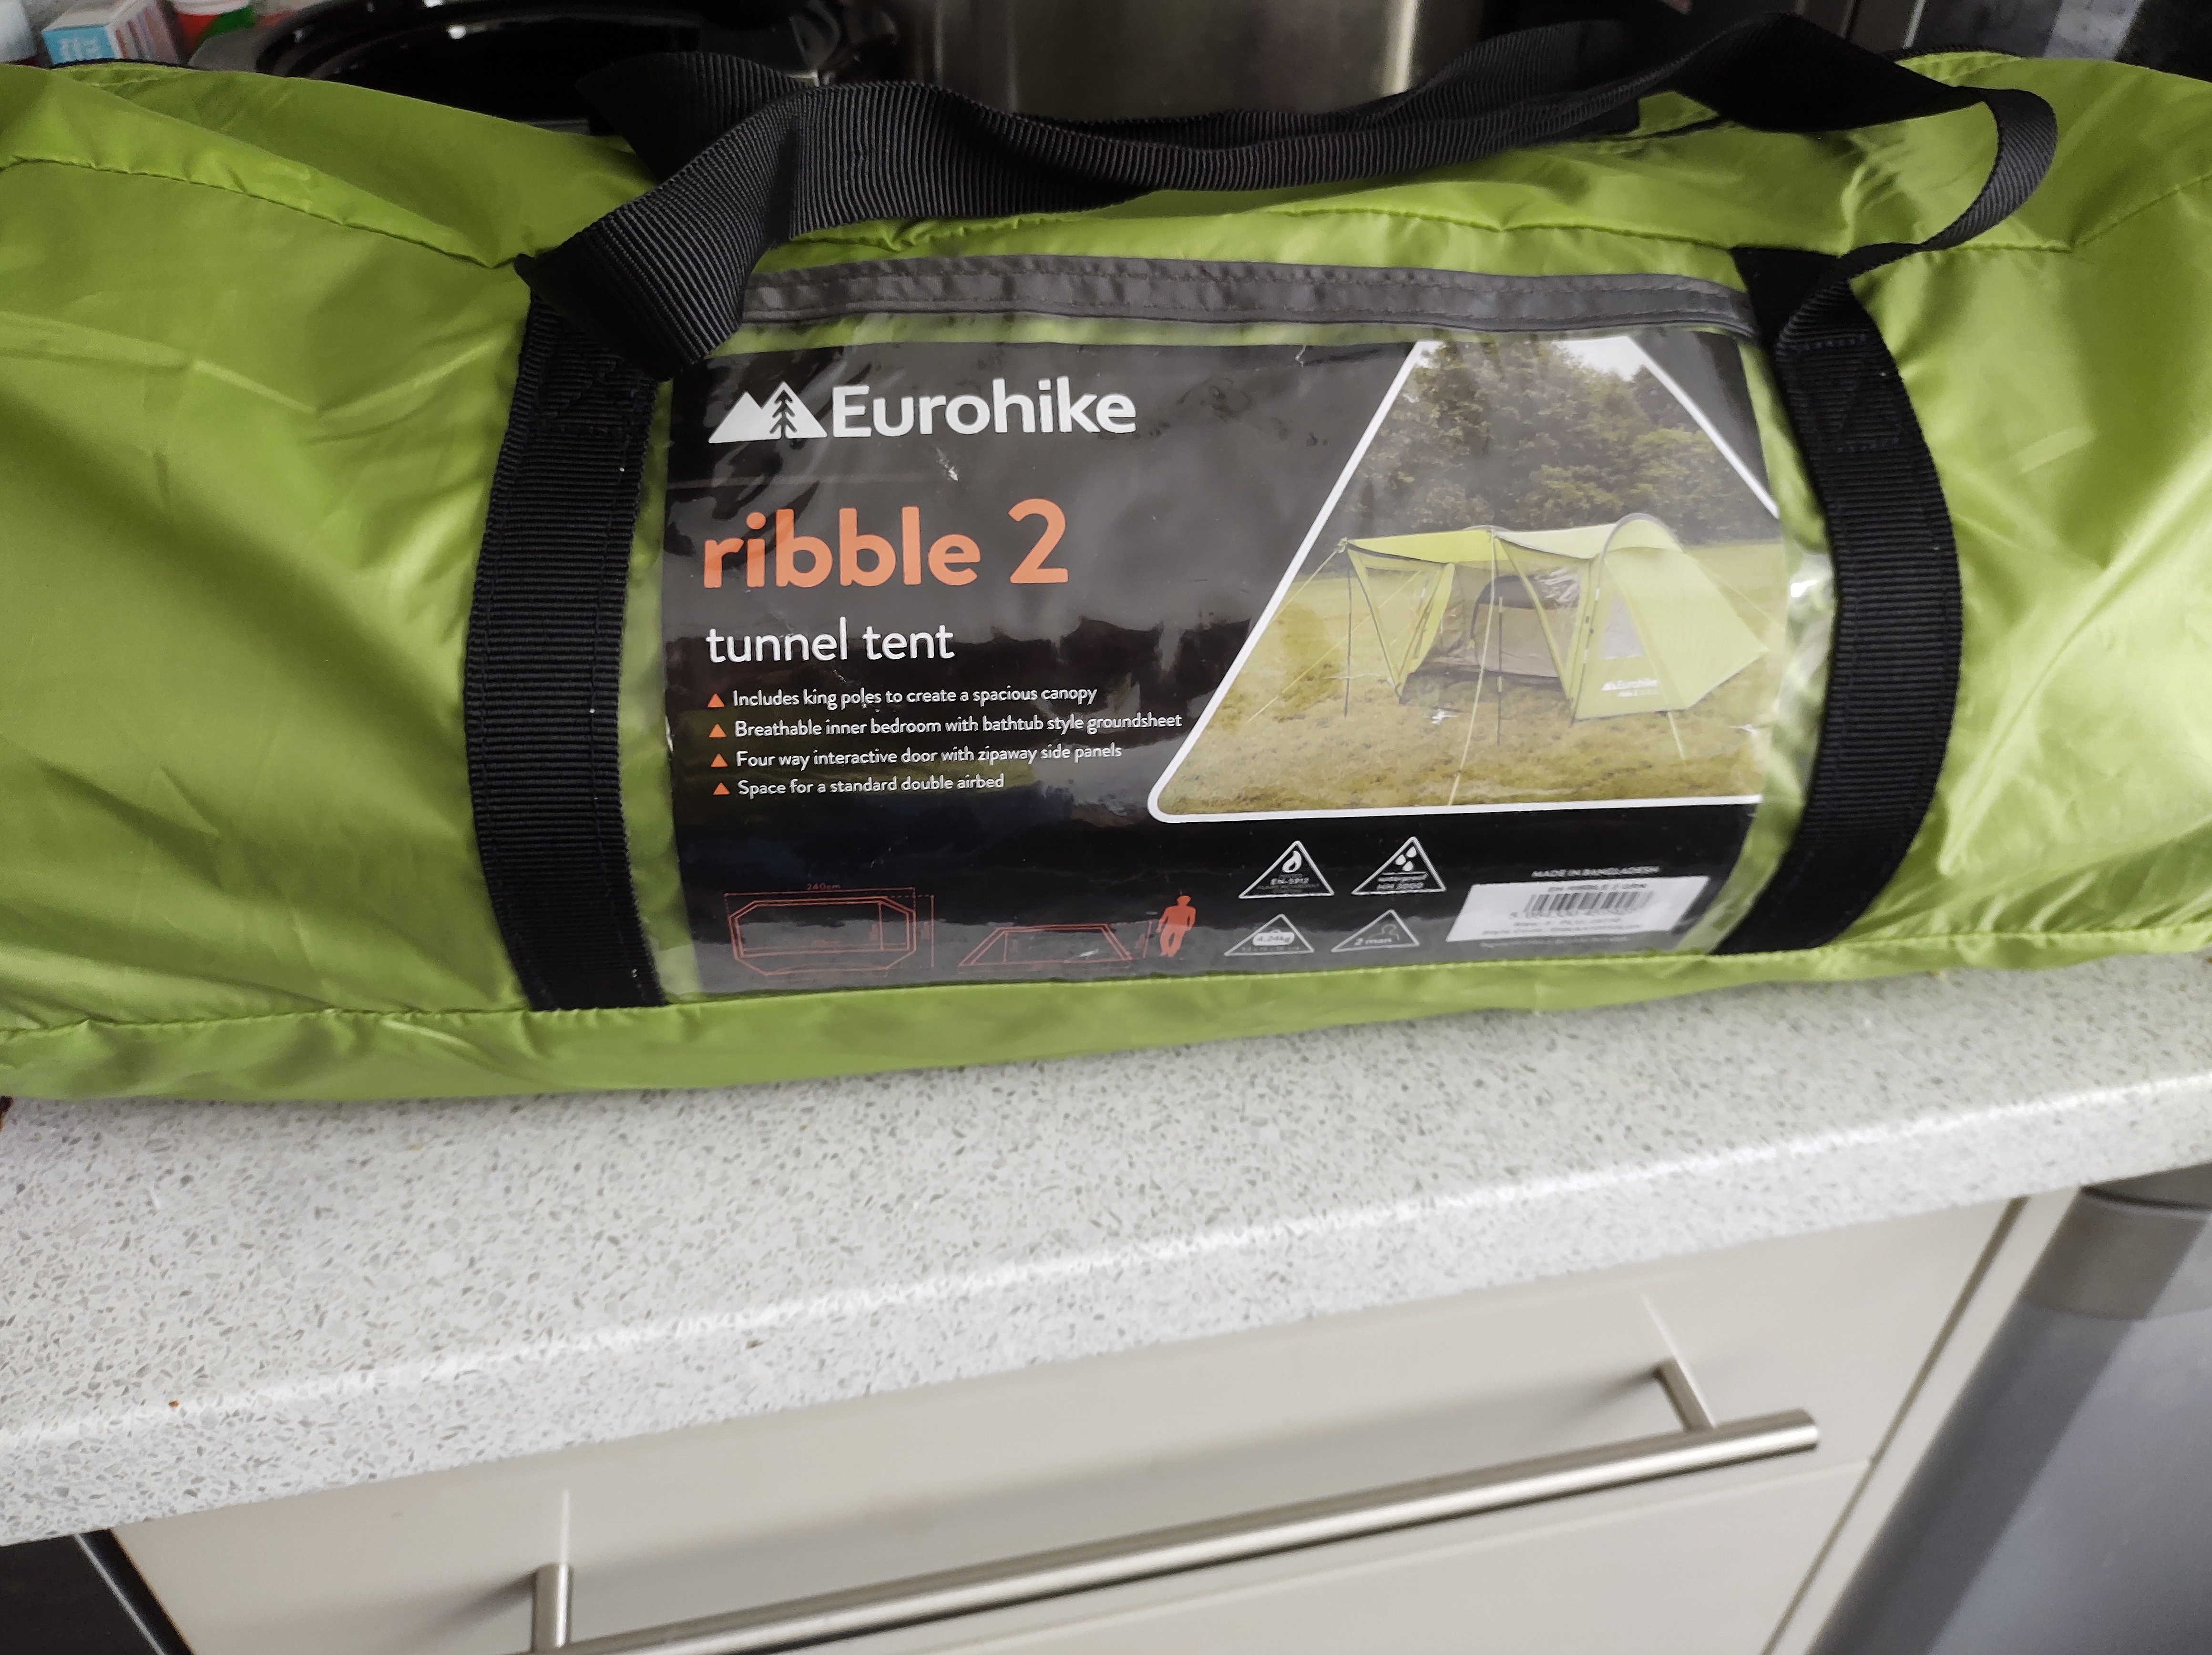 the eurohike ribble 2 in its bag